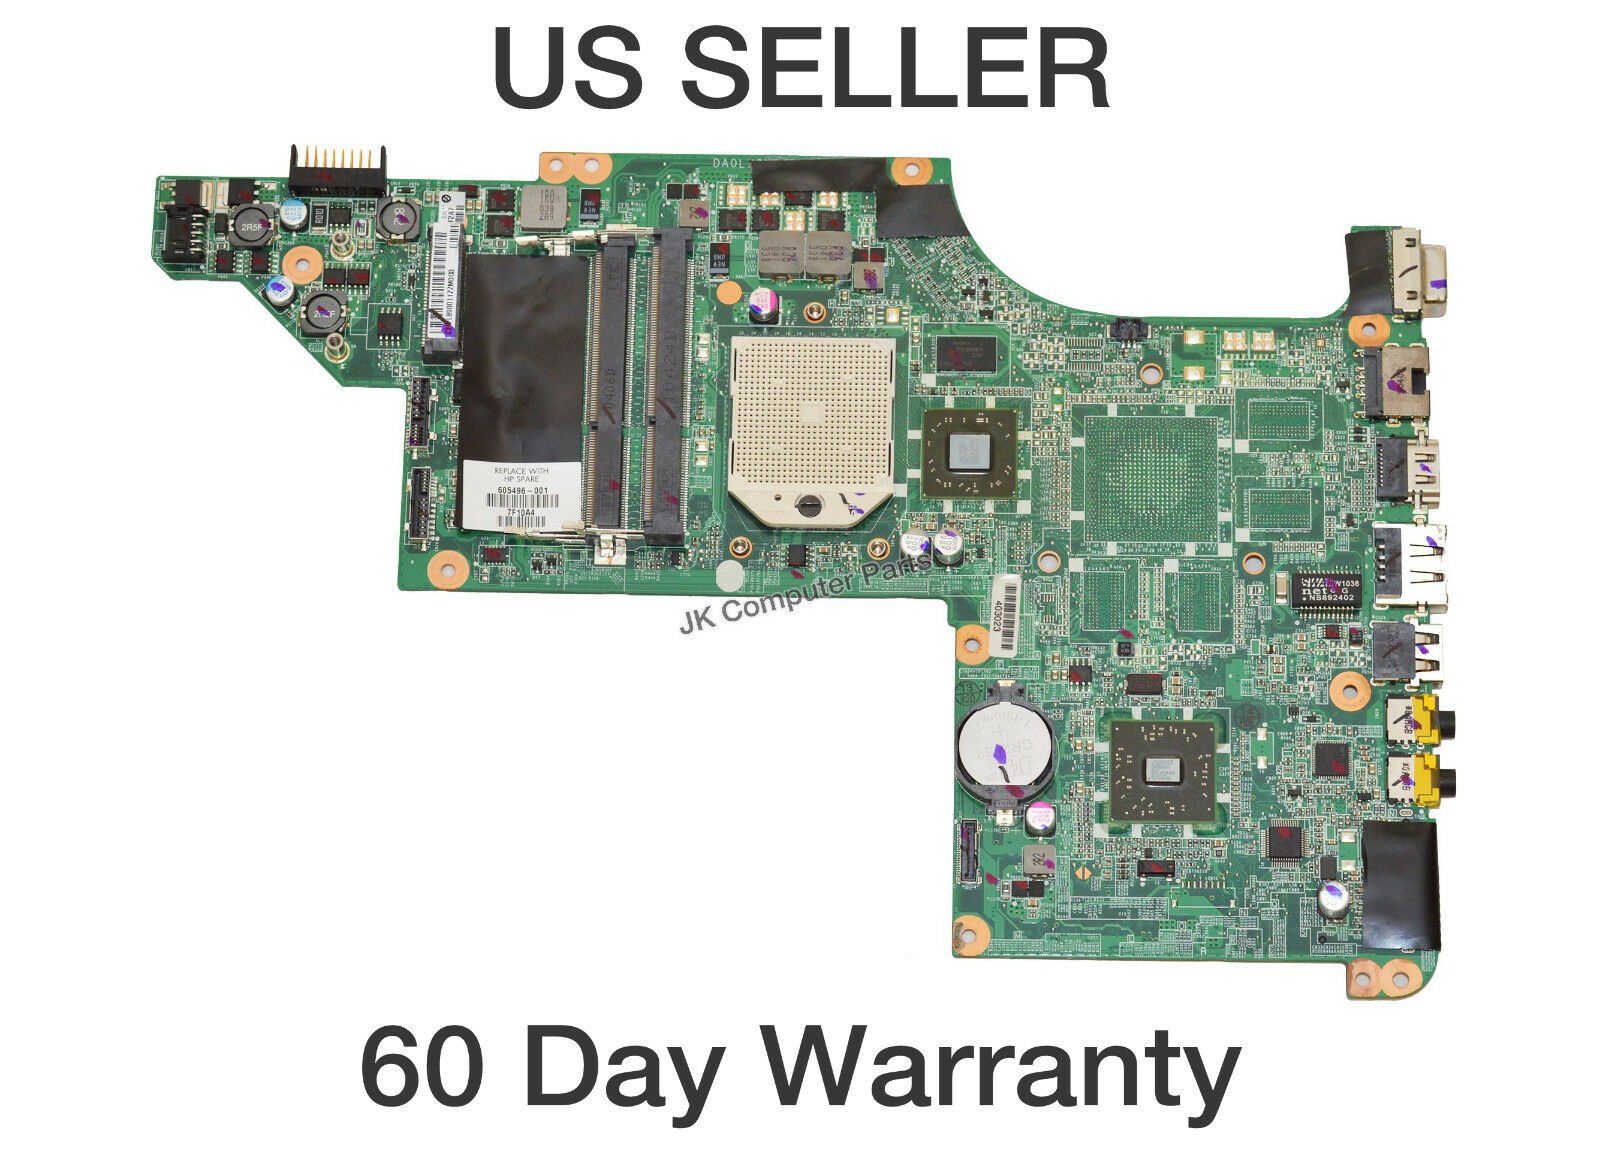 HP Pavilion DV7-4000 Series Laptop Motherboard DV7-4151NR DV7-4153CL 605496001 This motherboard is tested an